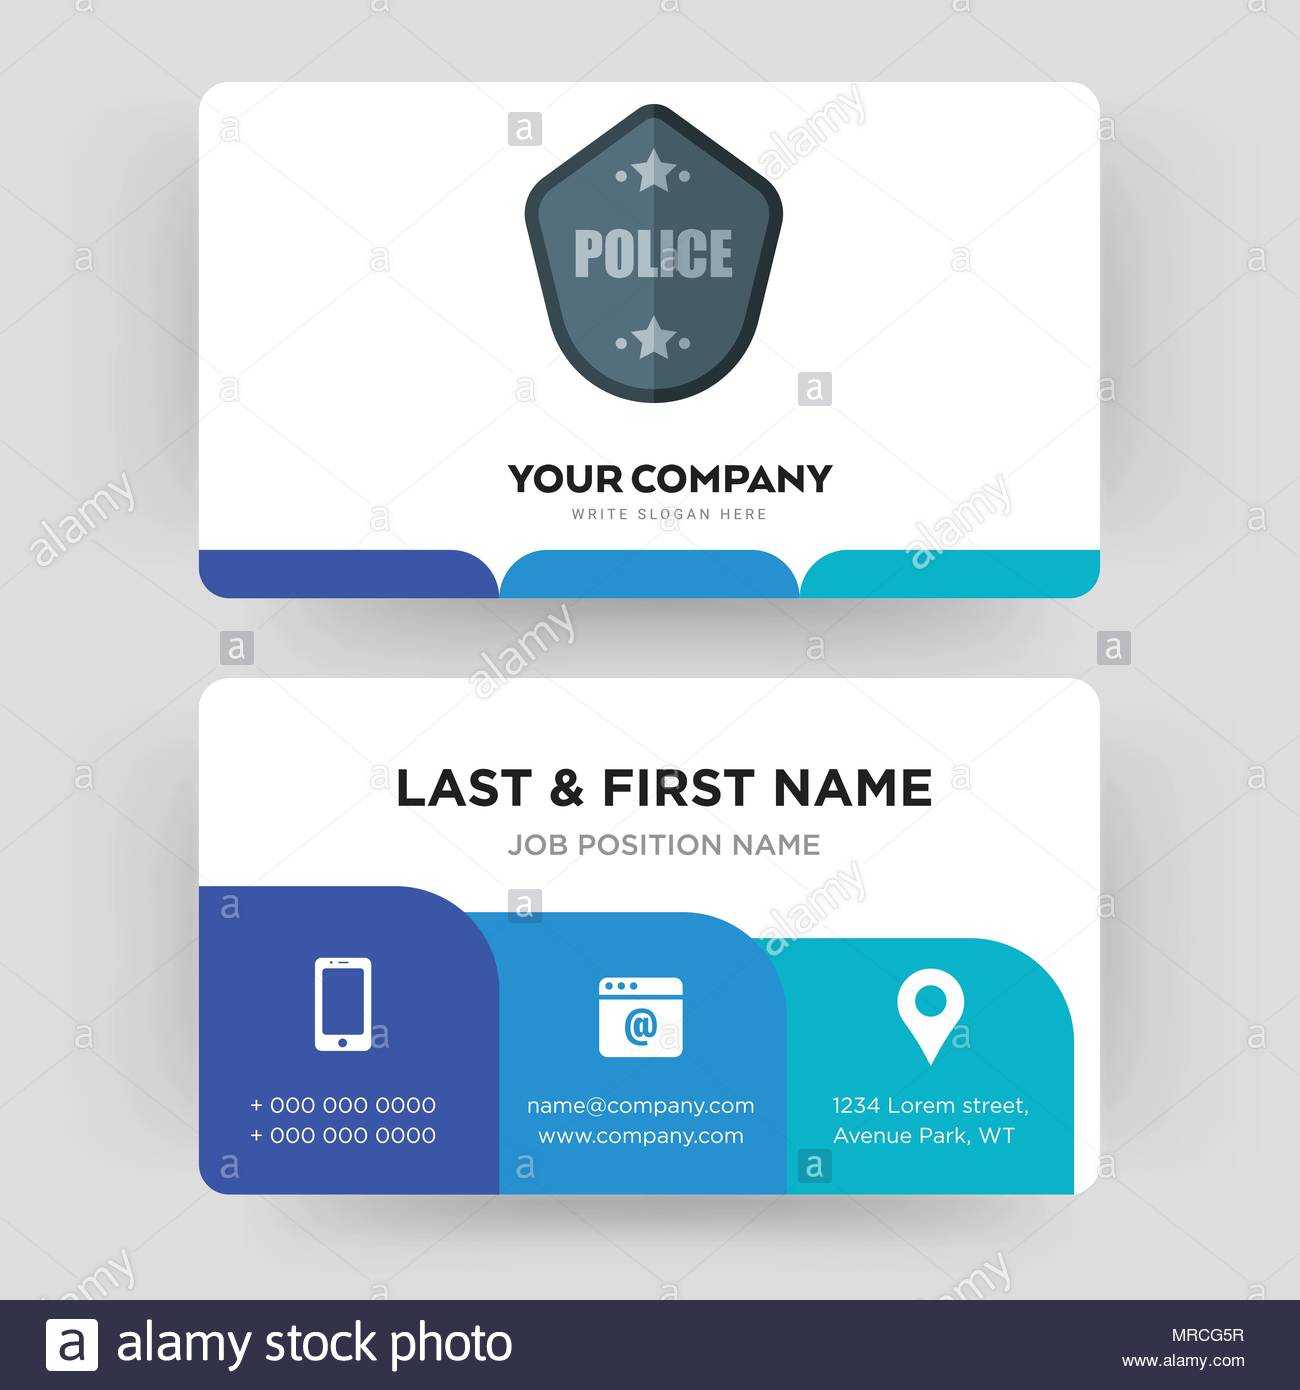 40A498 Fbi Id Card Template | Wiring Resources Within Mi6 Id Card Template